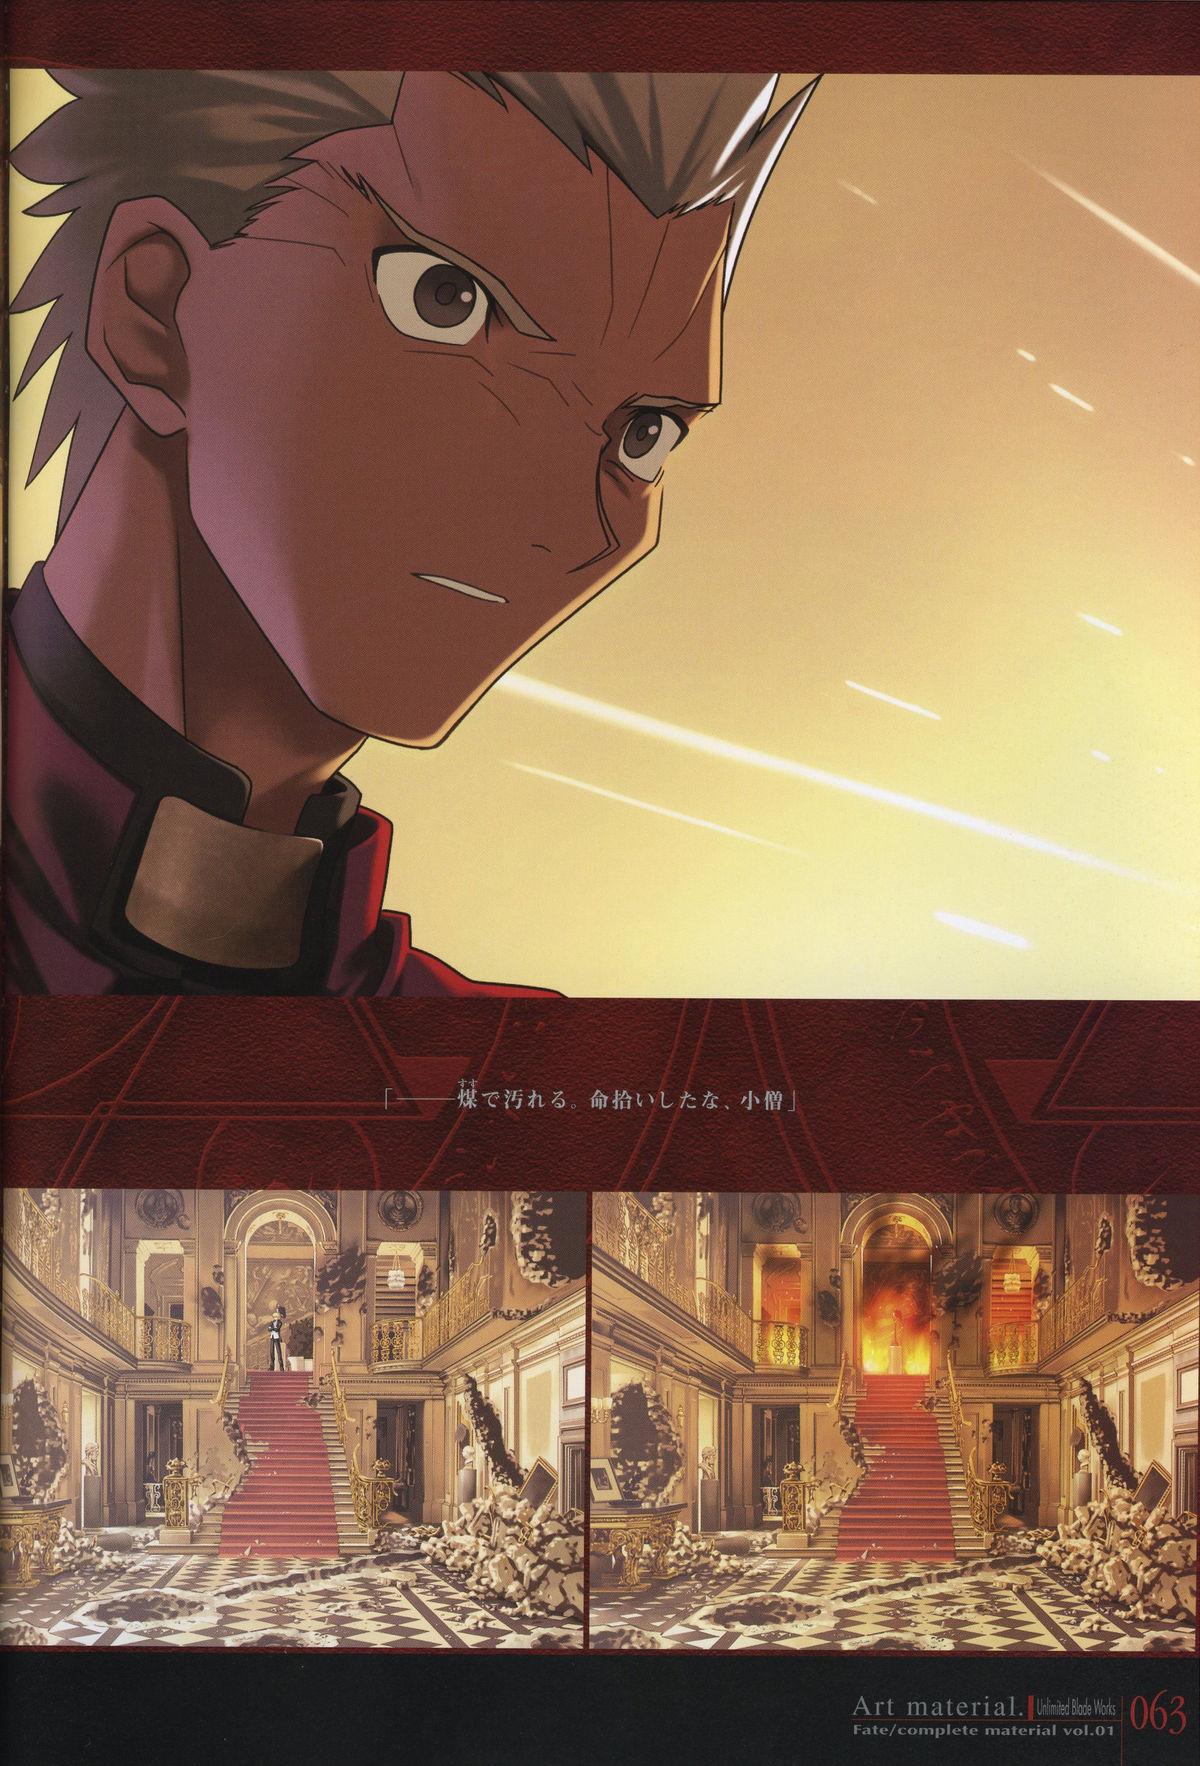 Fate/complete material I - Art material. 67